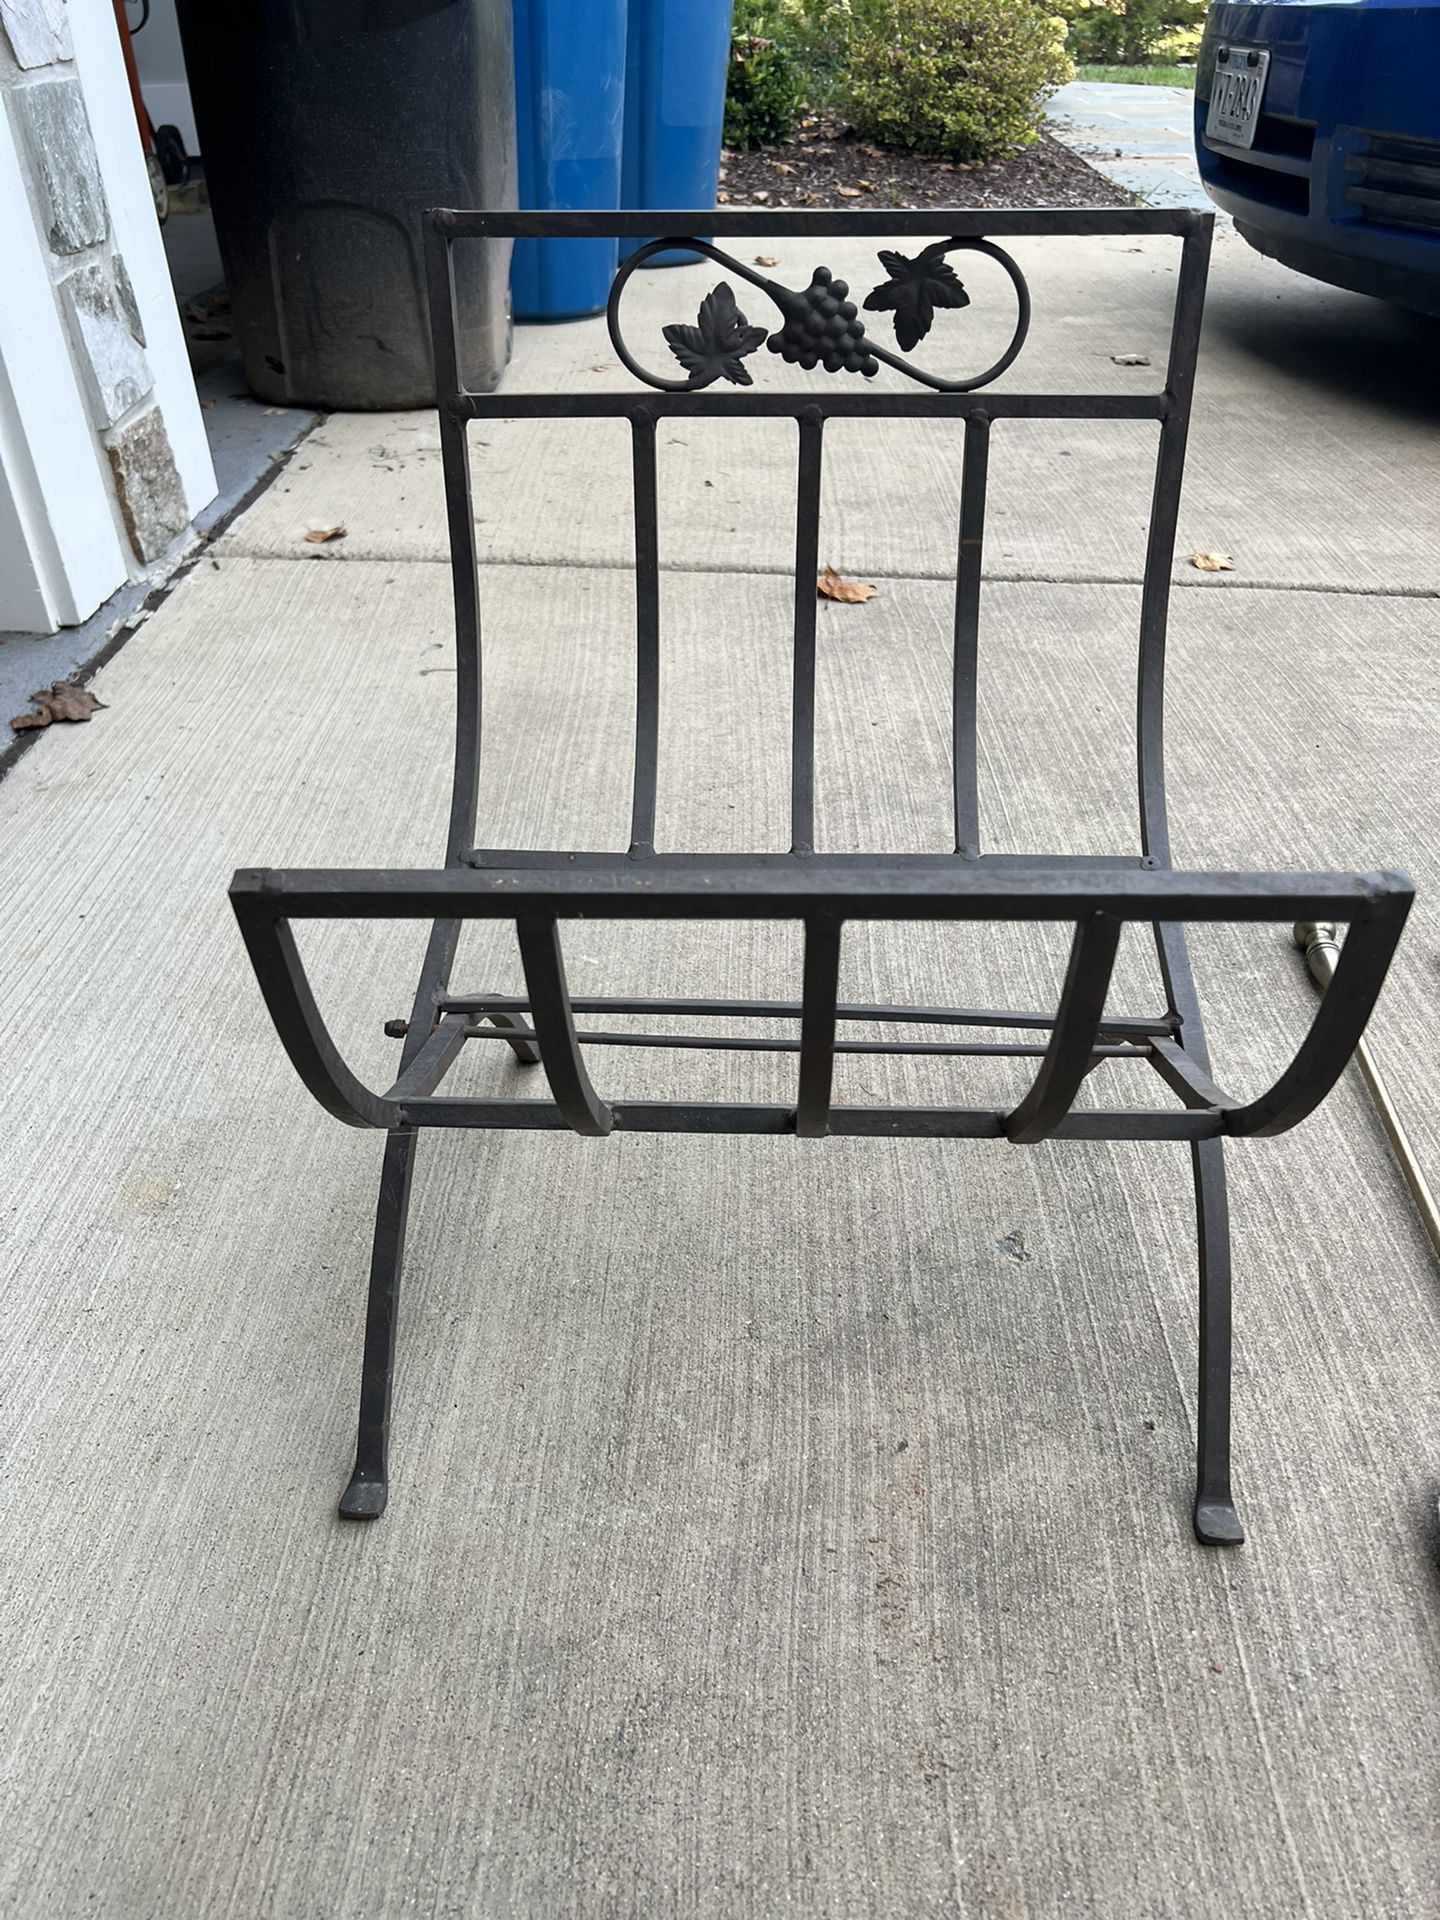 PRICED REDUCED: Fireplace Wood Rack - Wrought Iron